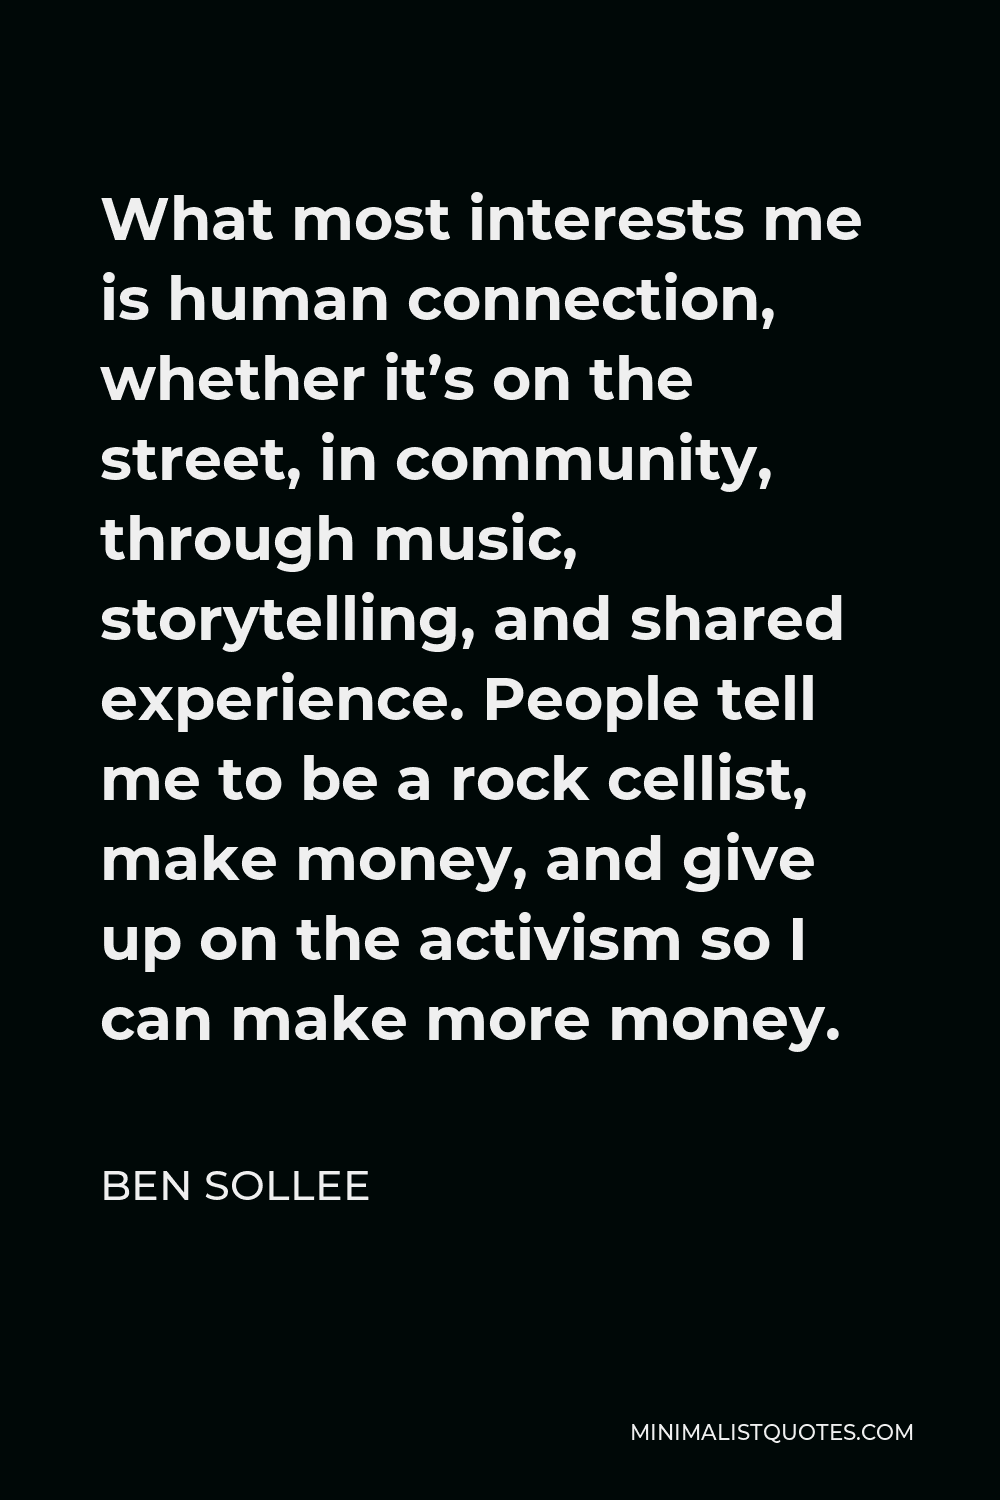 Ben Sollee Quote - What most interests me is human connection, whether it’s on the street, in community, through music, storytelling, and shared experience. People tell me to be a rock cellist, make money, and give up on the activism so I can make more money.